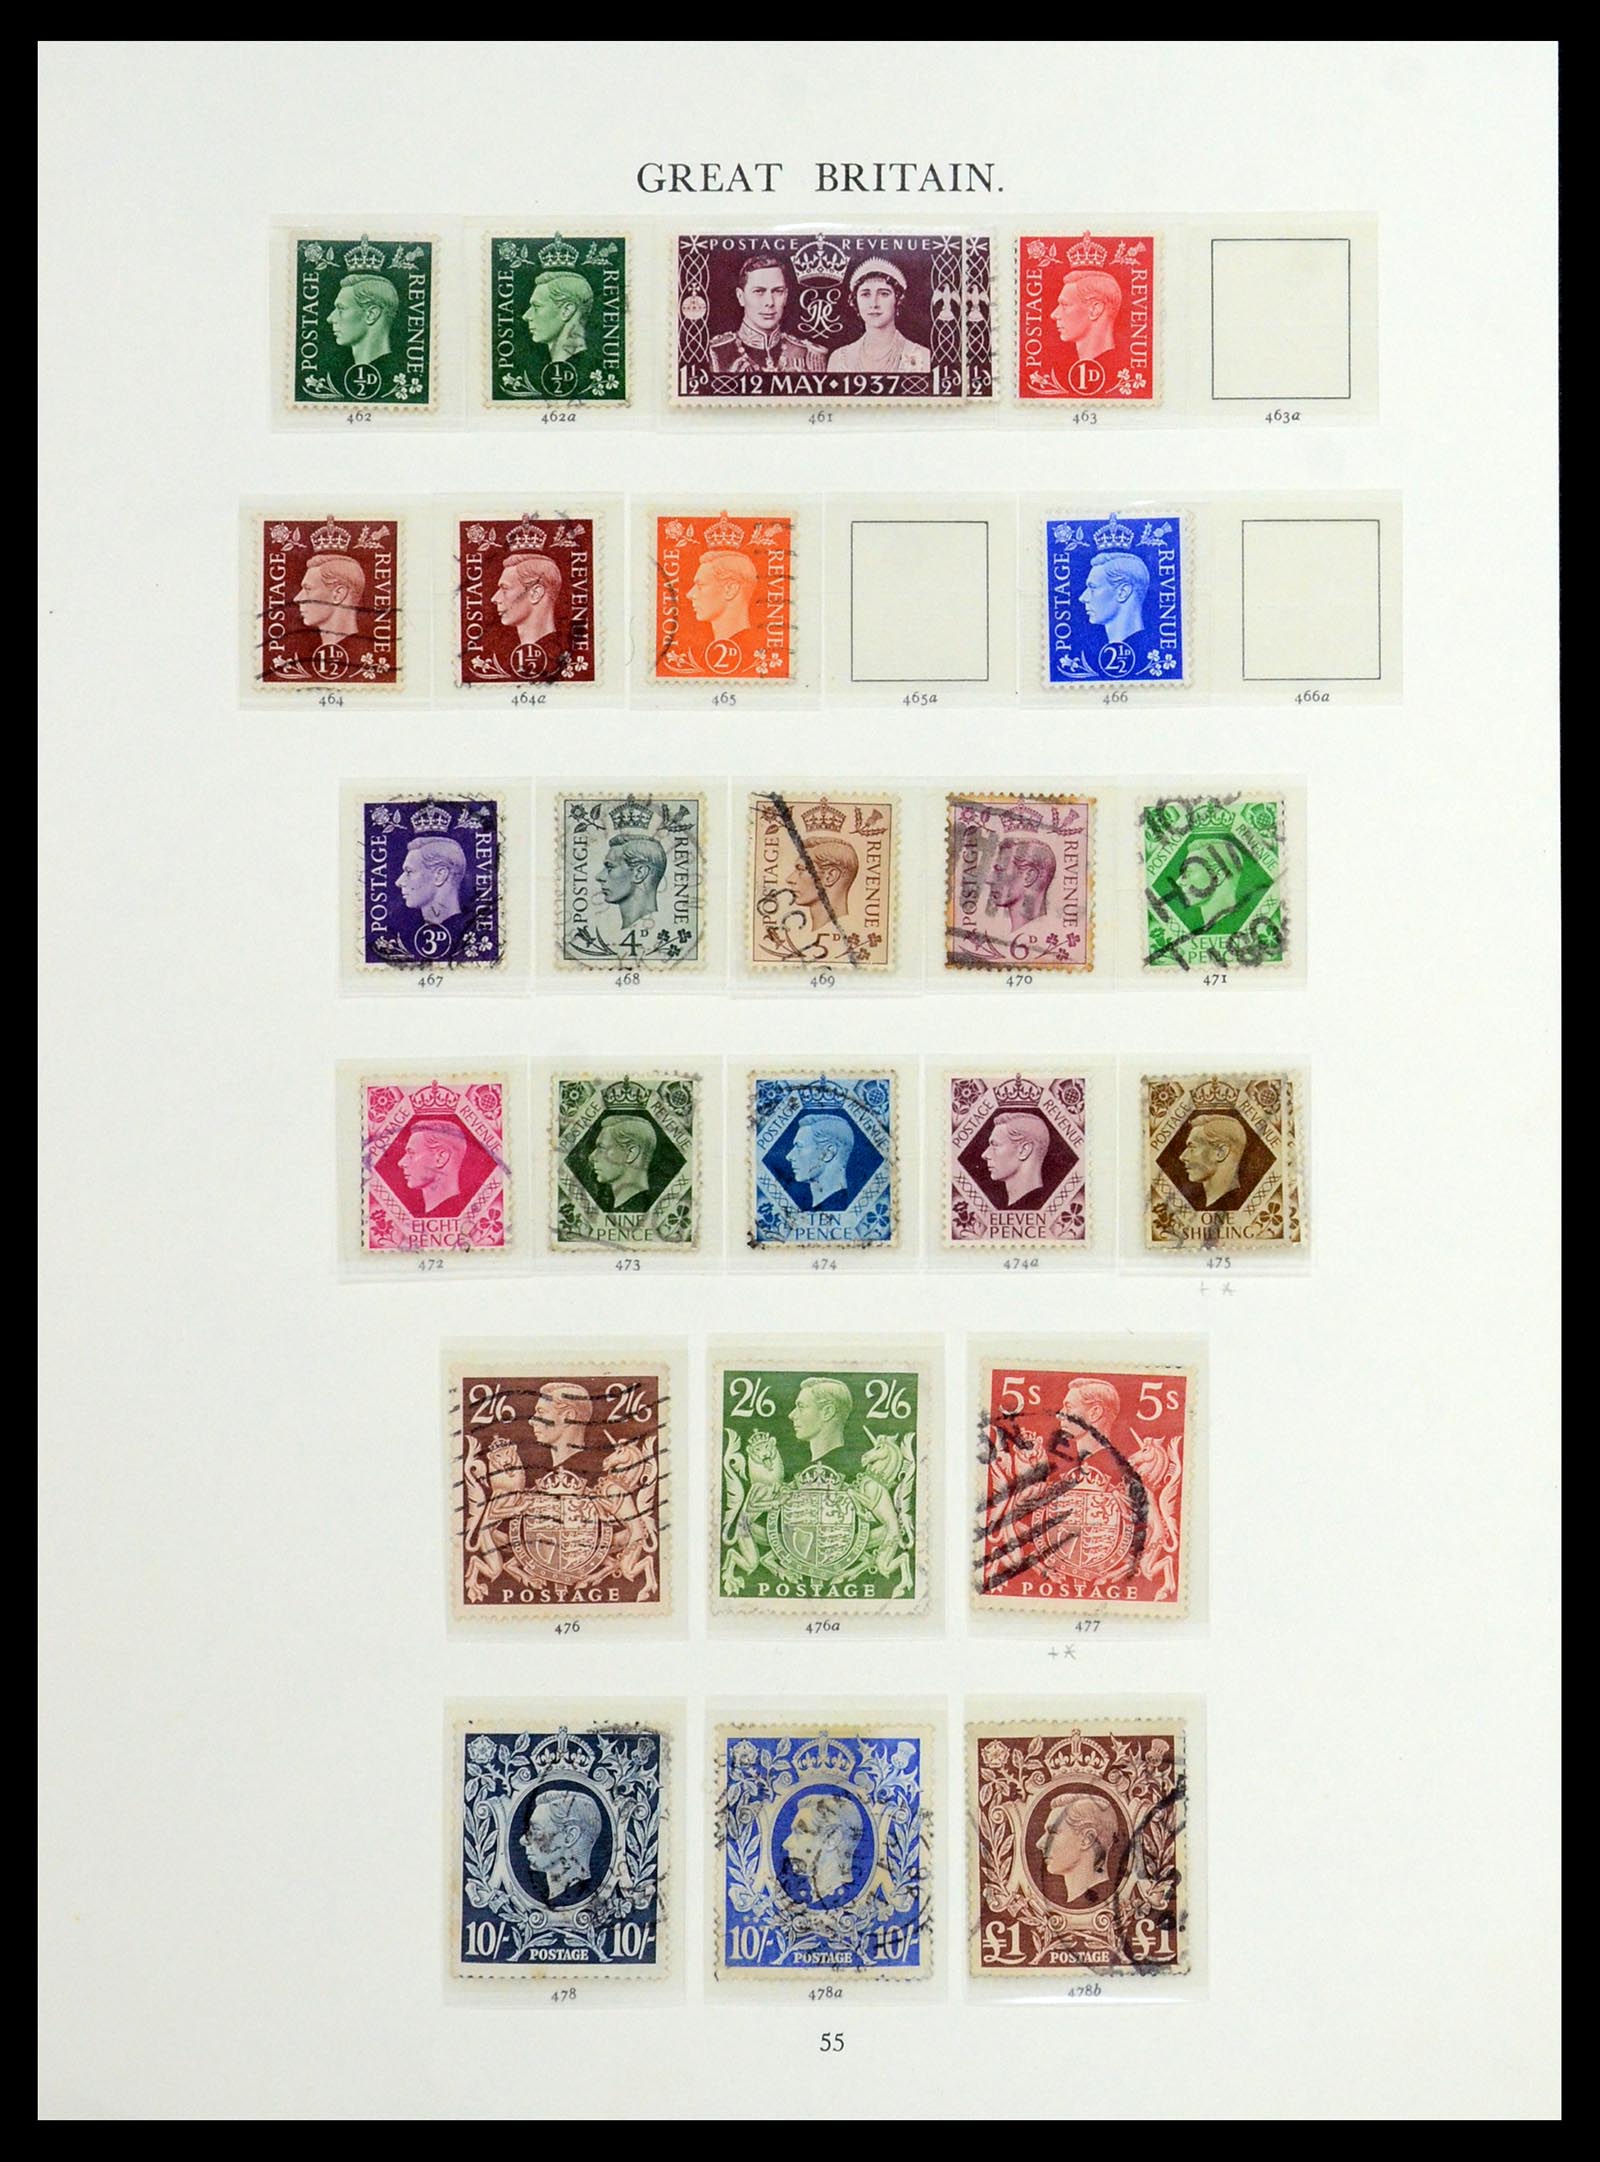 36367 014 - Stamp collection 36367 Great Britain 1841-1970.